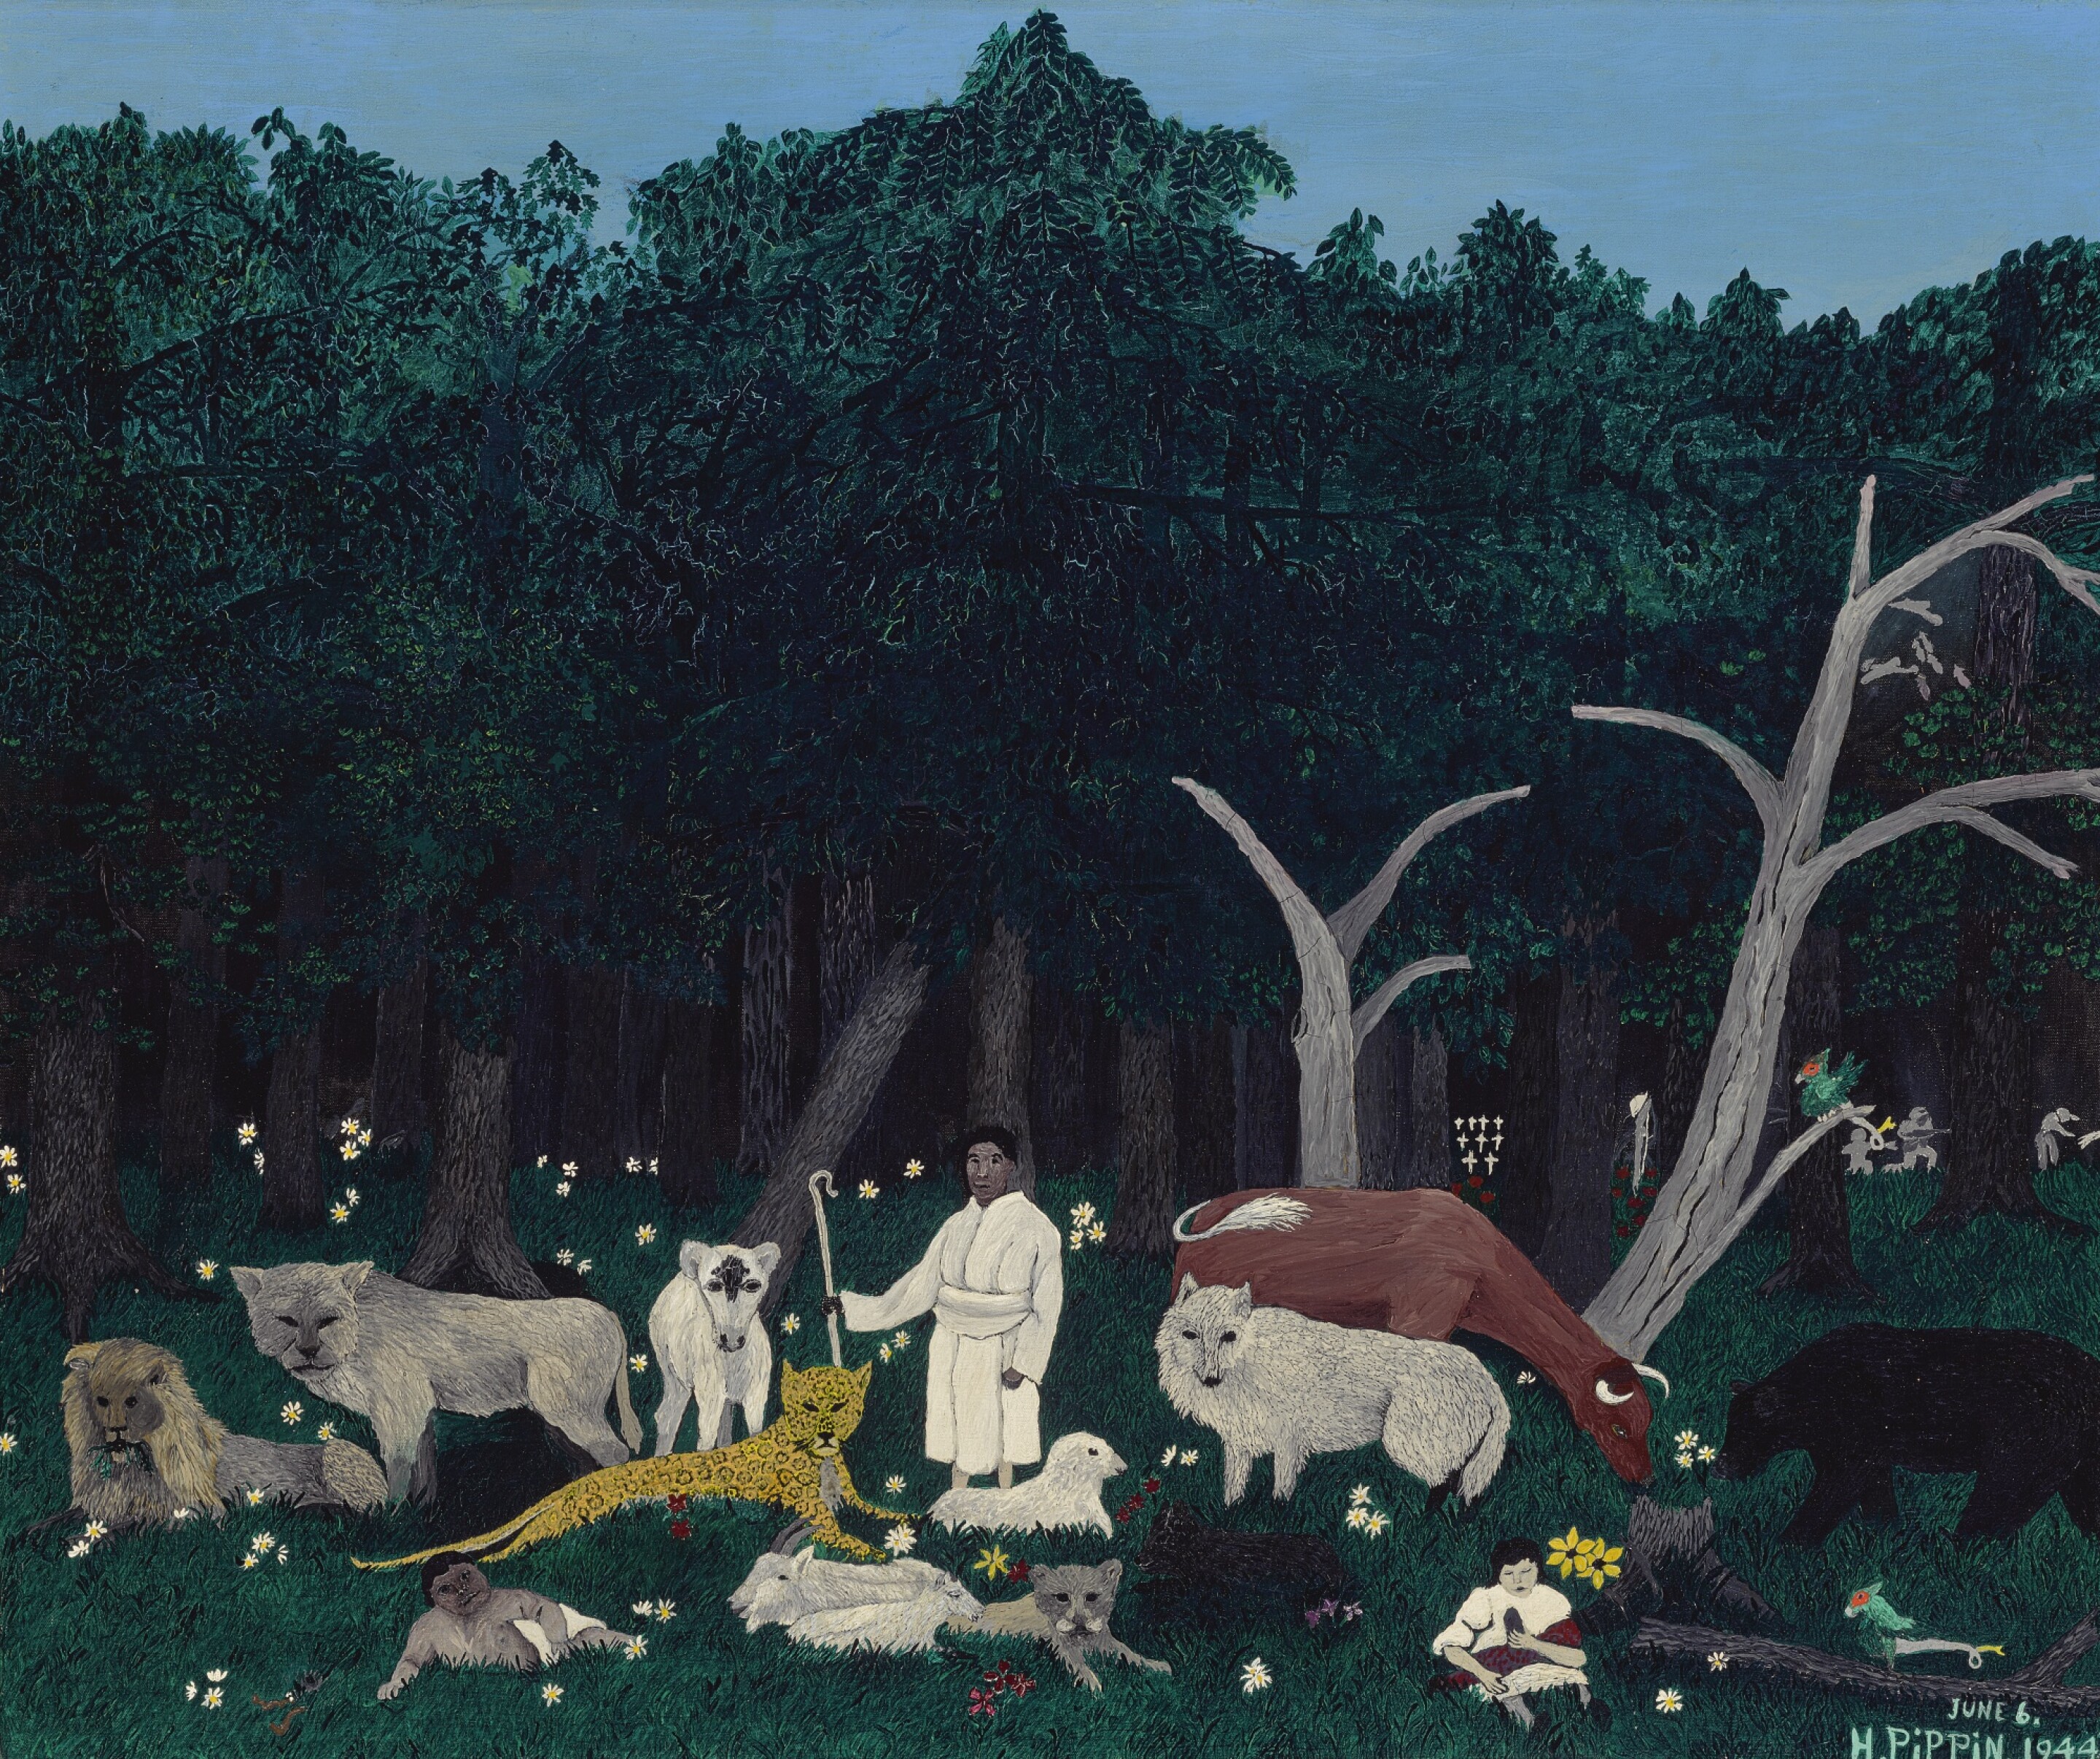 Heiliger Berg I by Horace Pippin - 1944 - 77,5 x 91,4 cm Private Sammlung